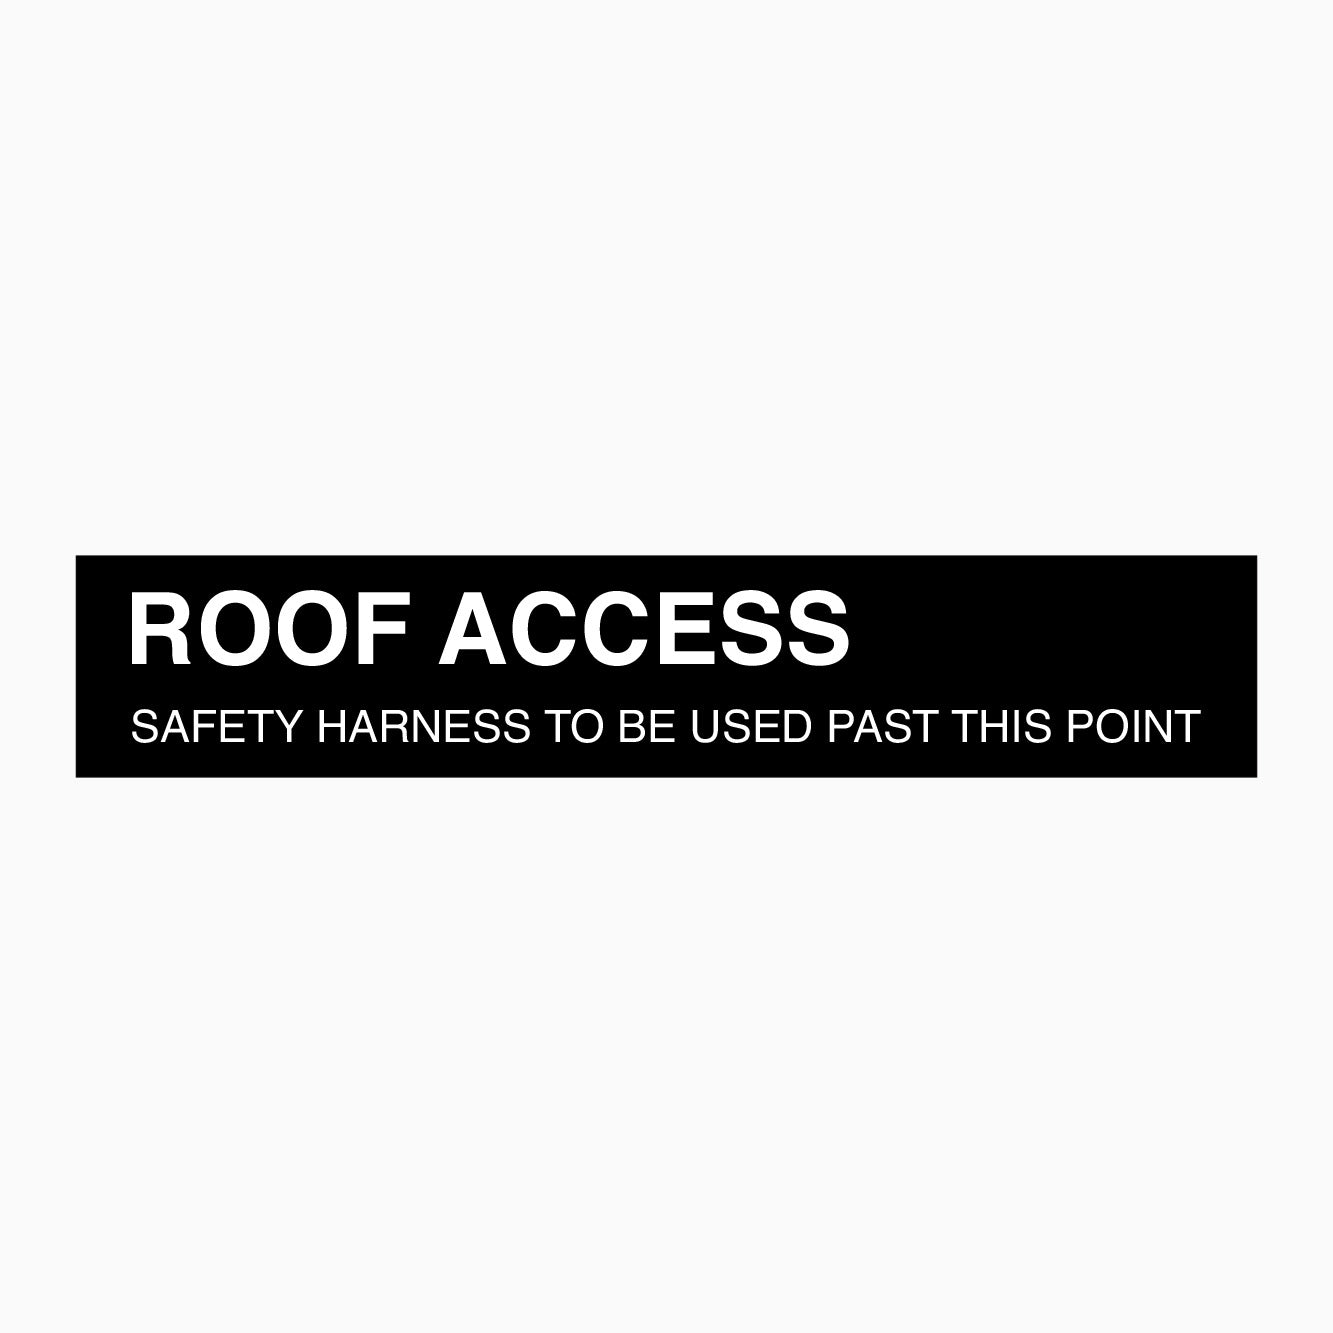 ROOF ACCESS SIGN - SAFETY HARNESS TO BE USED PAST THIS POINT SIGN